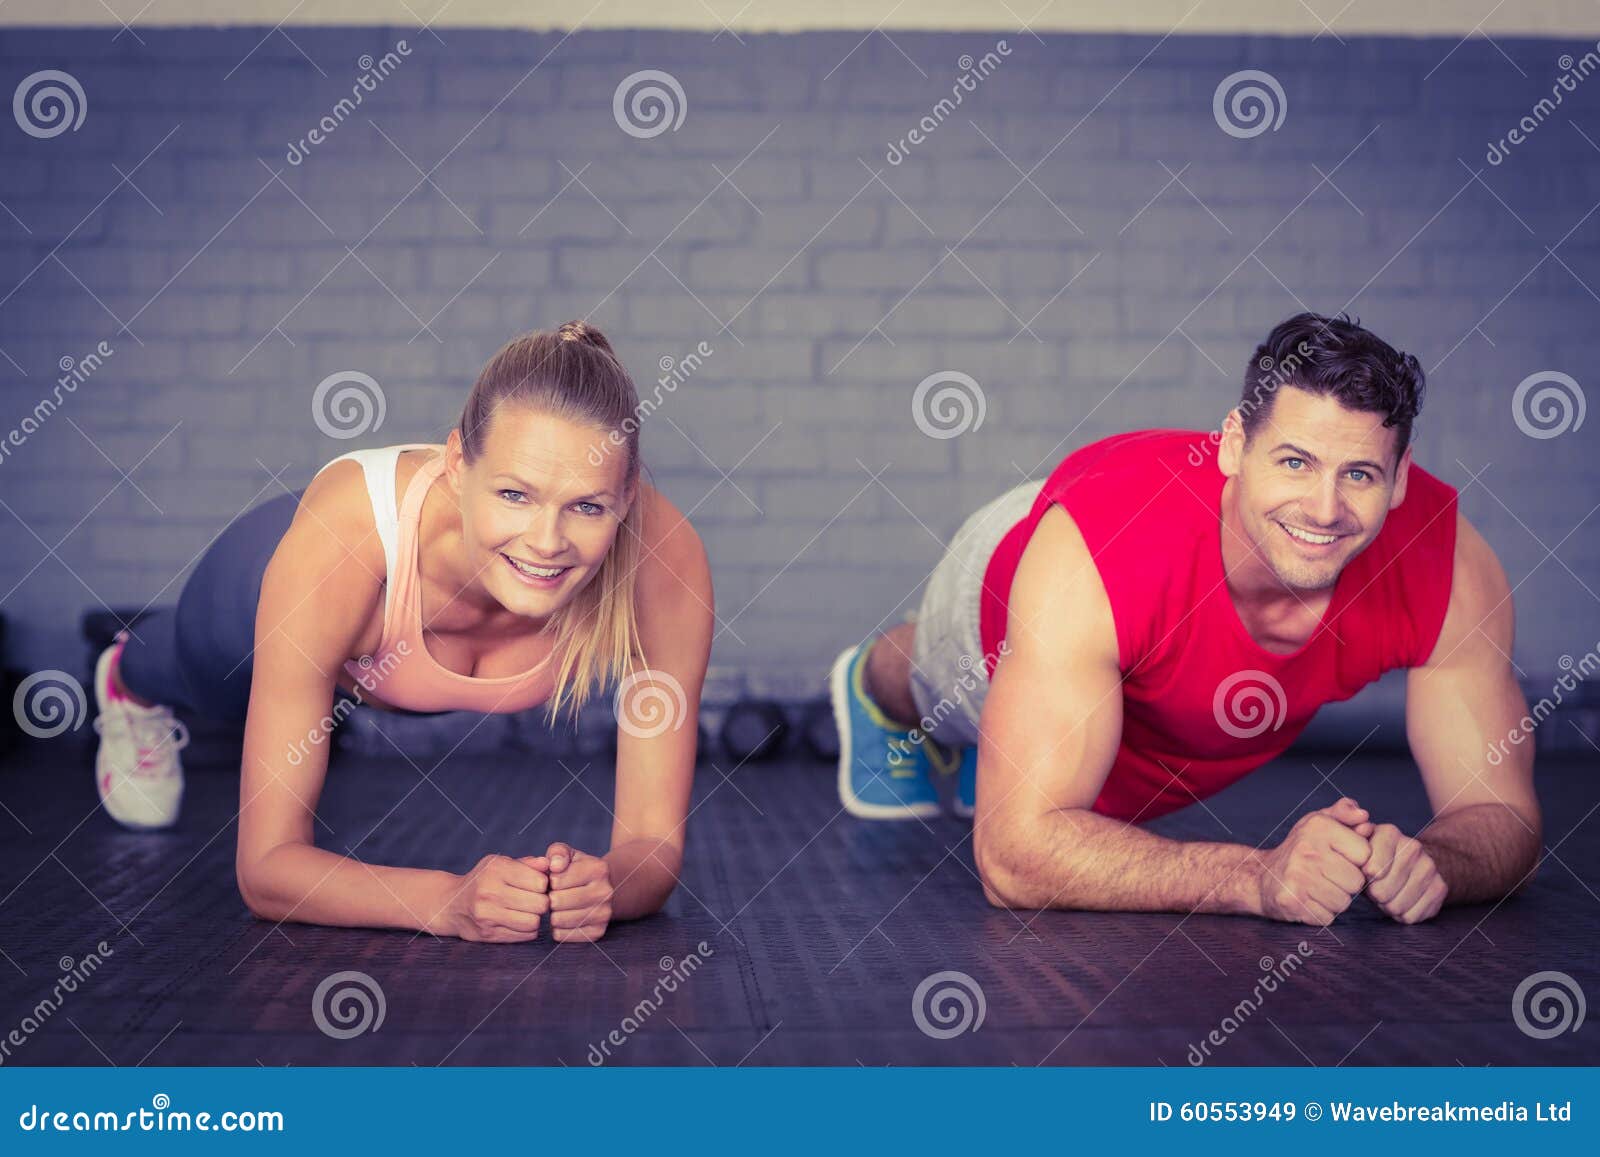 fit smiling couple planking together in gym